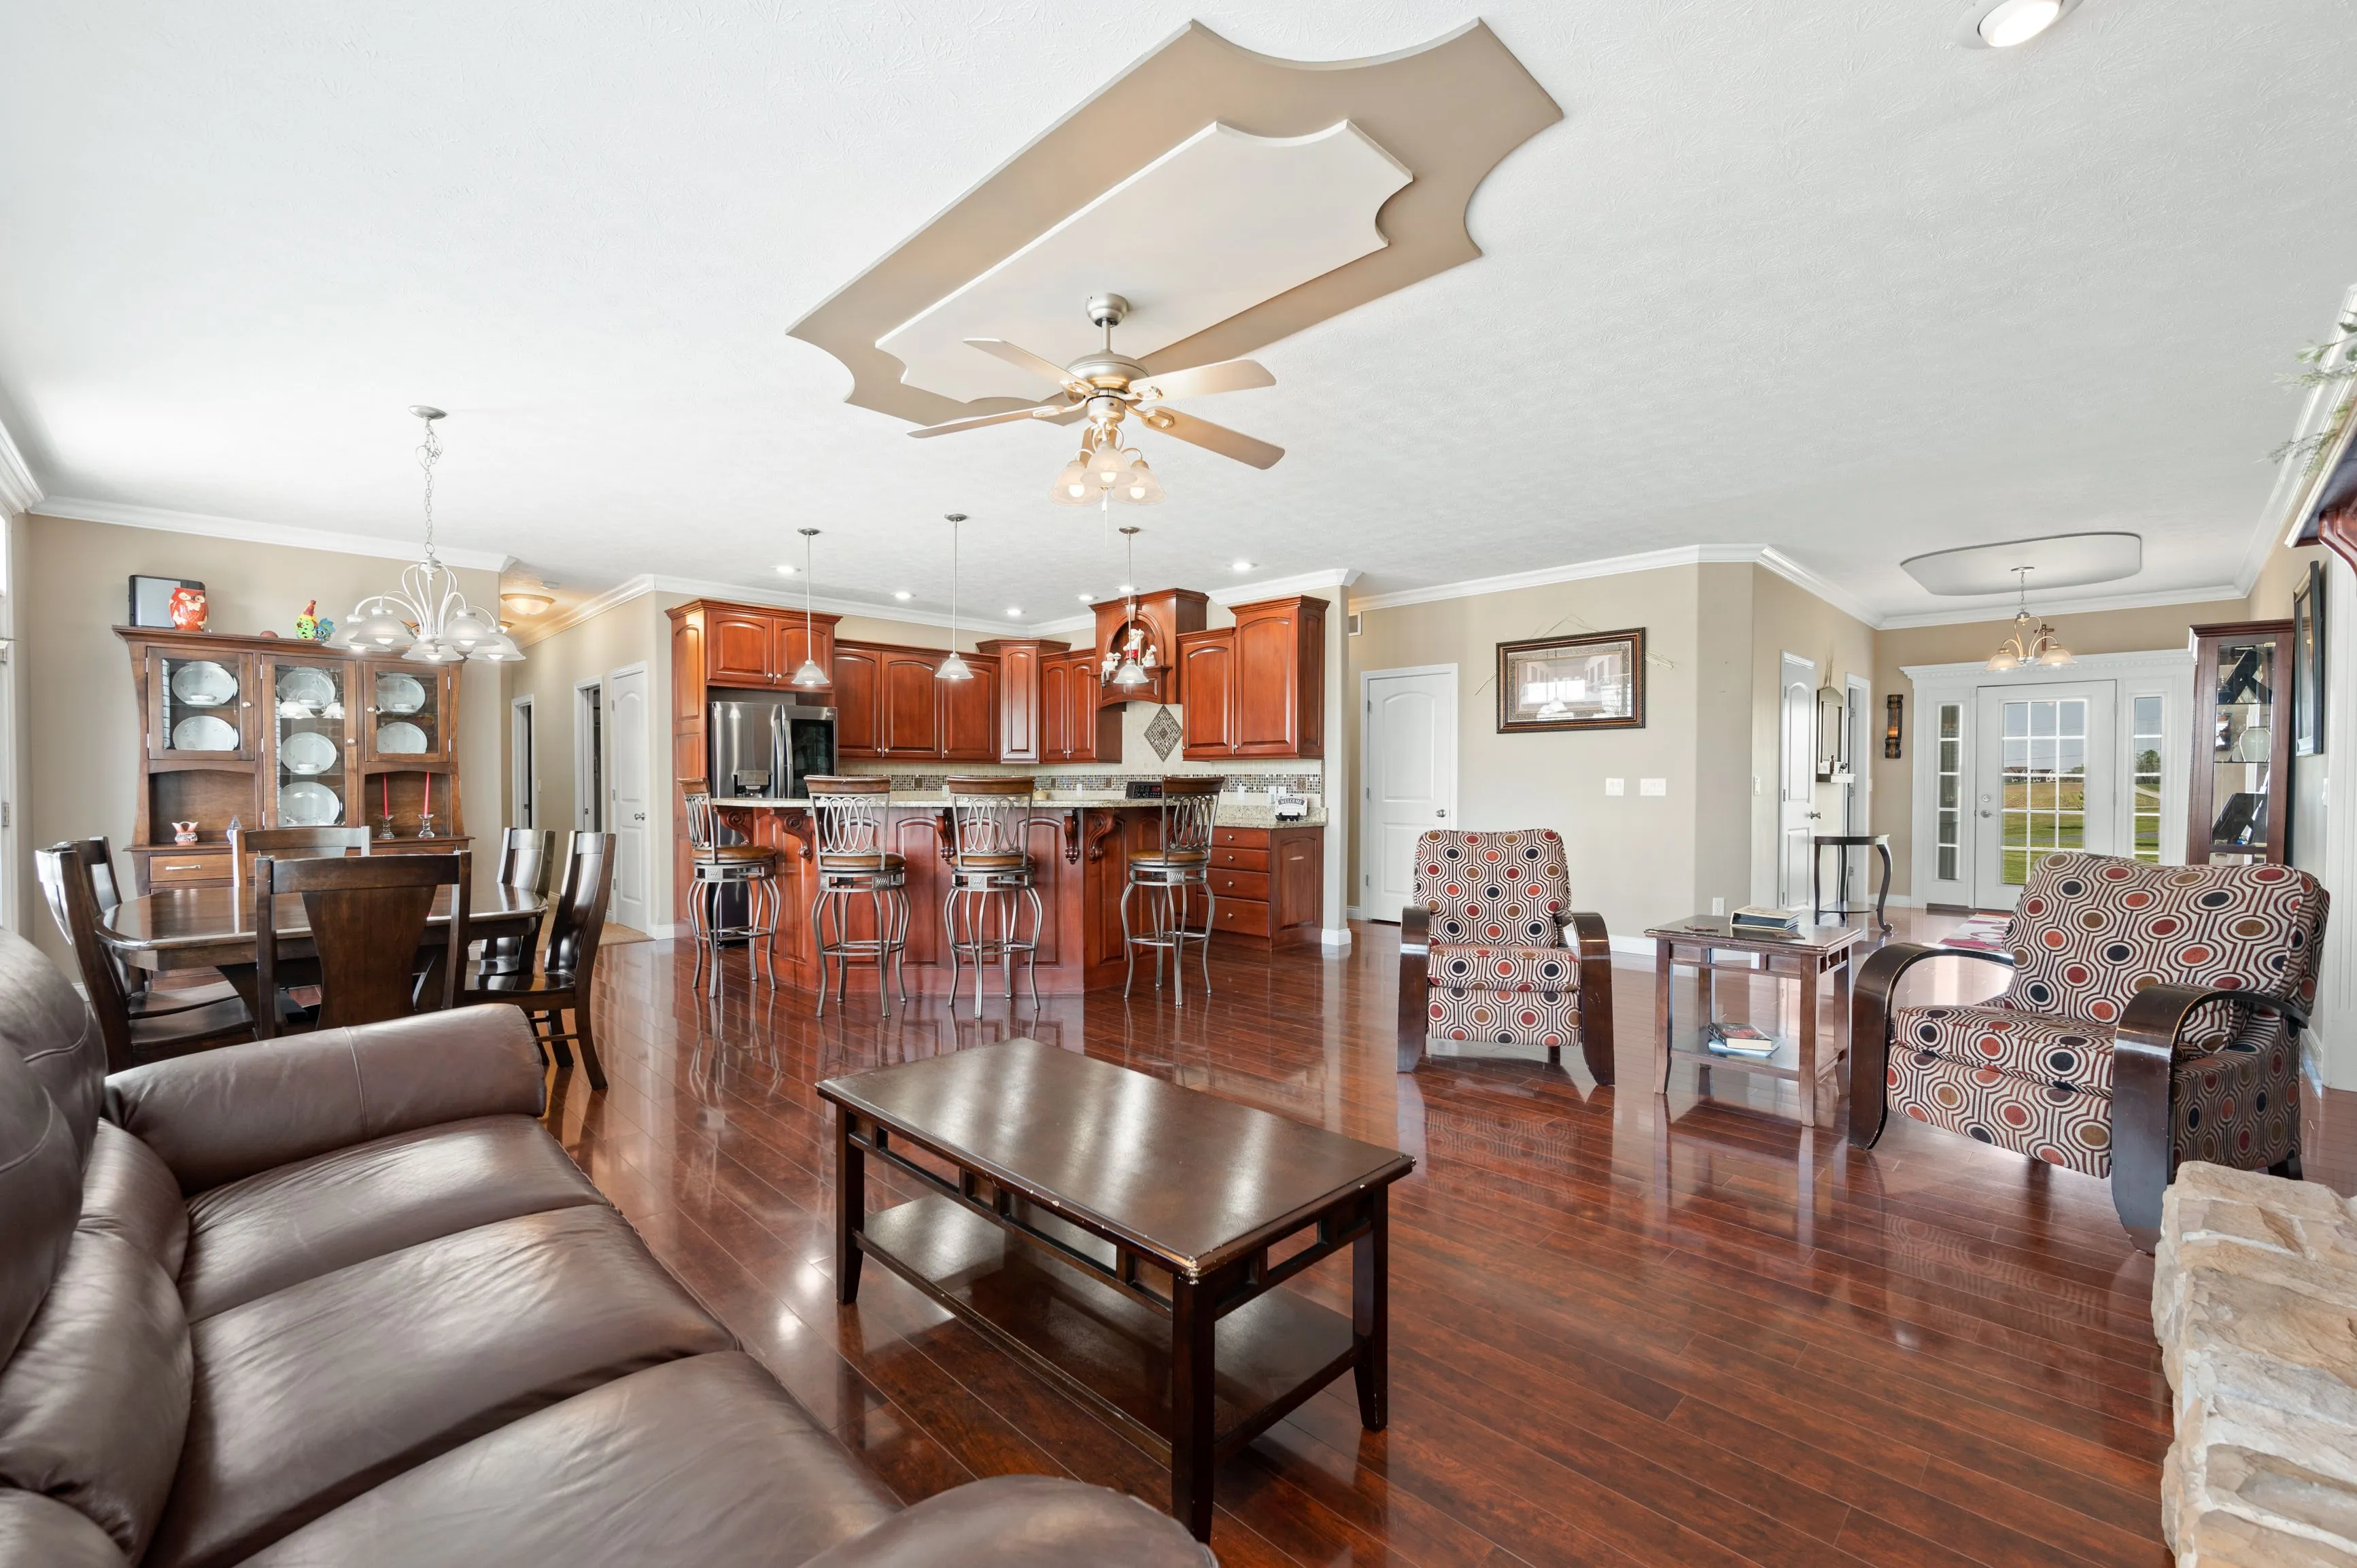 Spacious living room with hardwood floors, a ceiling fan, and an open concept kitchen with bar stools.